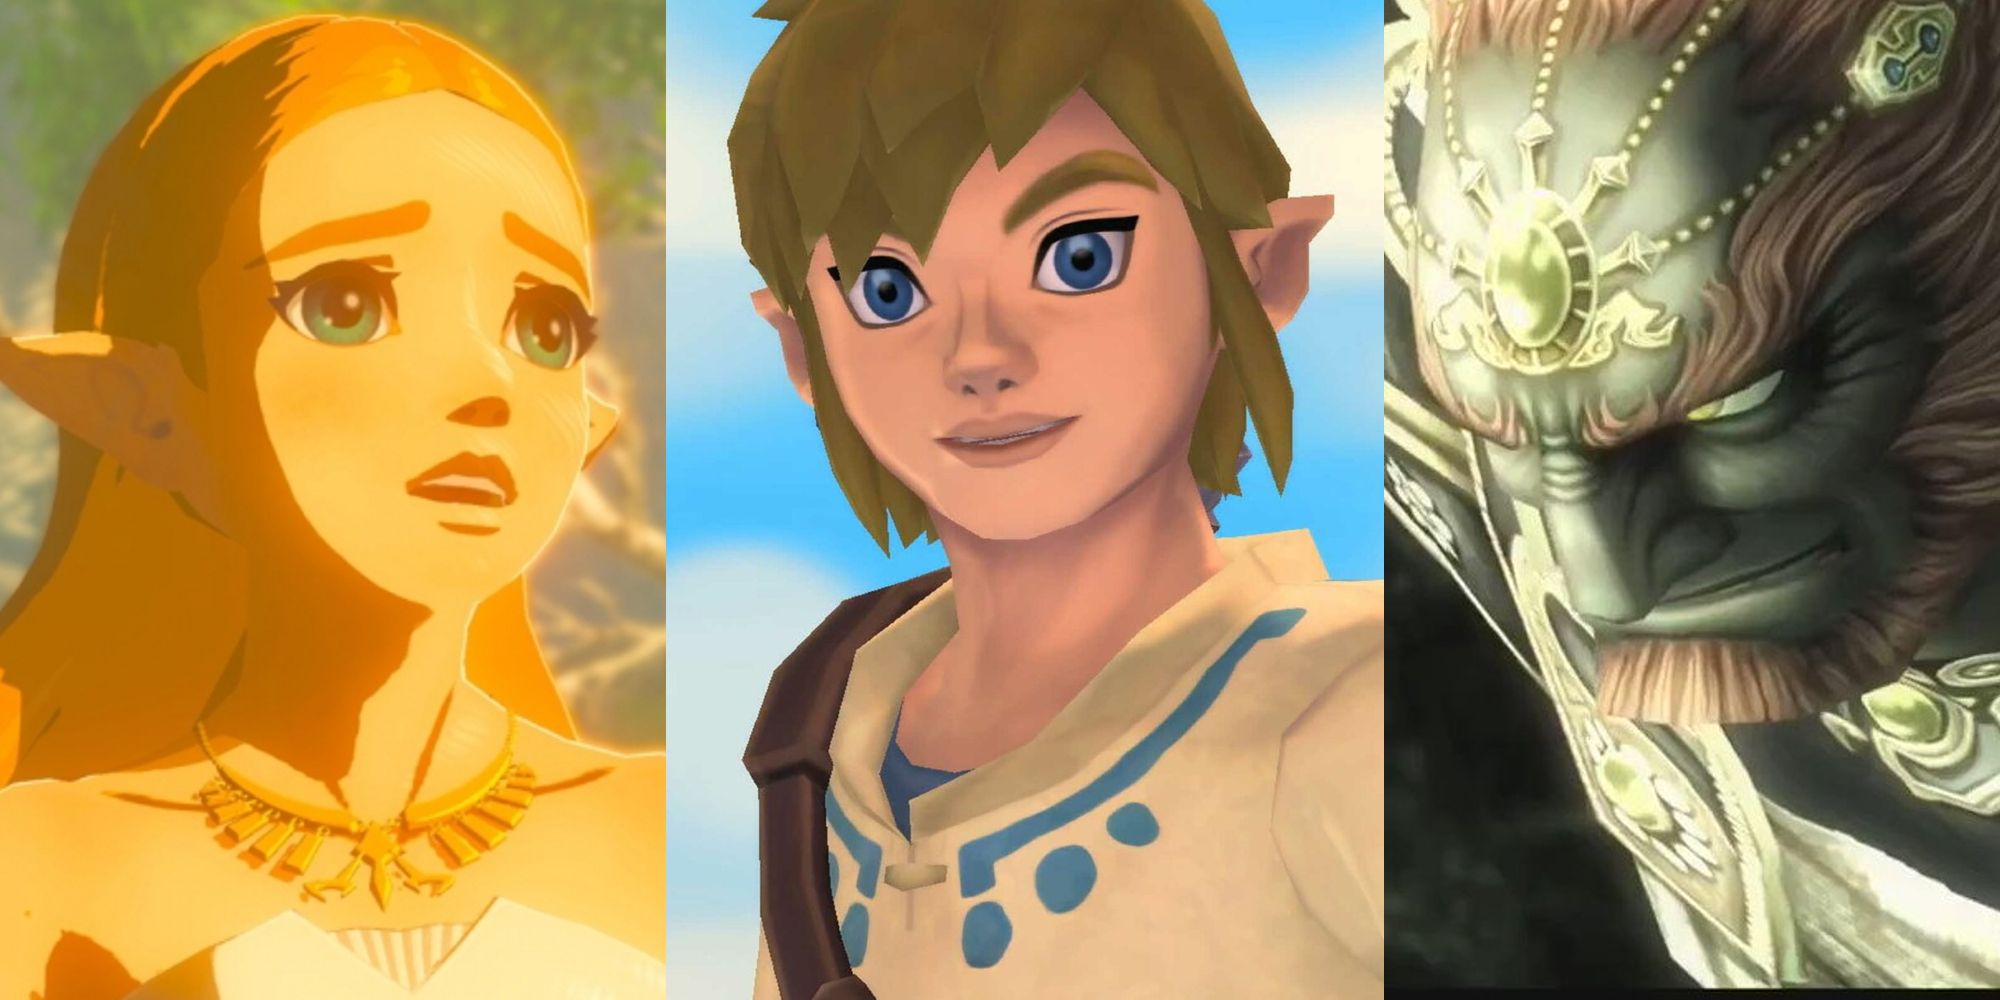 Legend Of Zelda Games That Could Inspire An Animated Movie